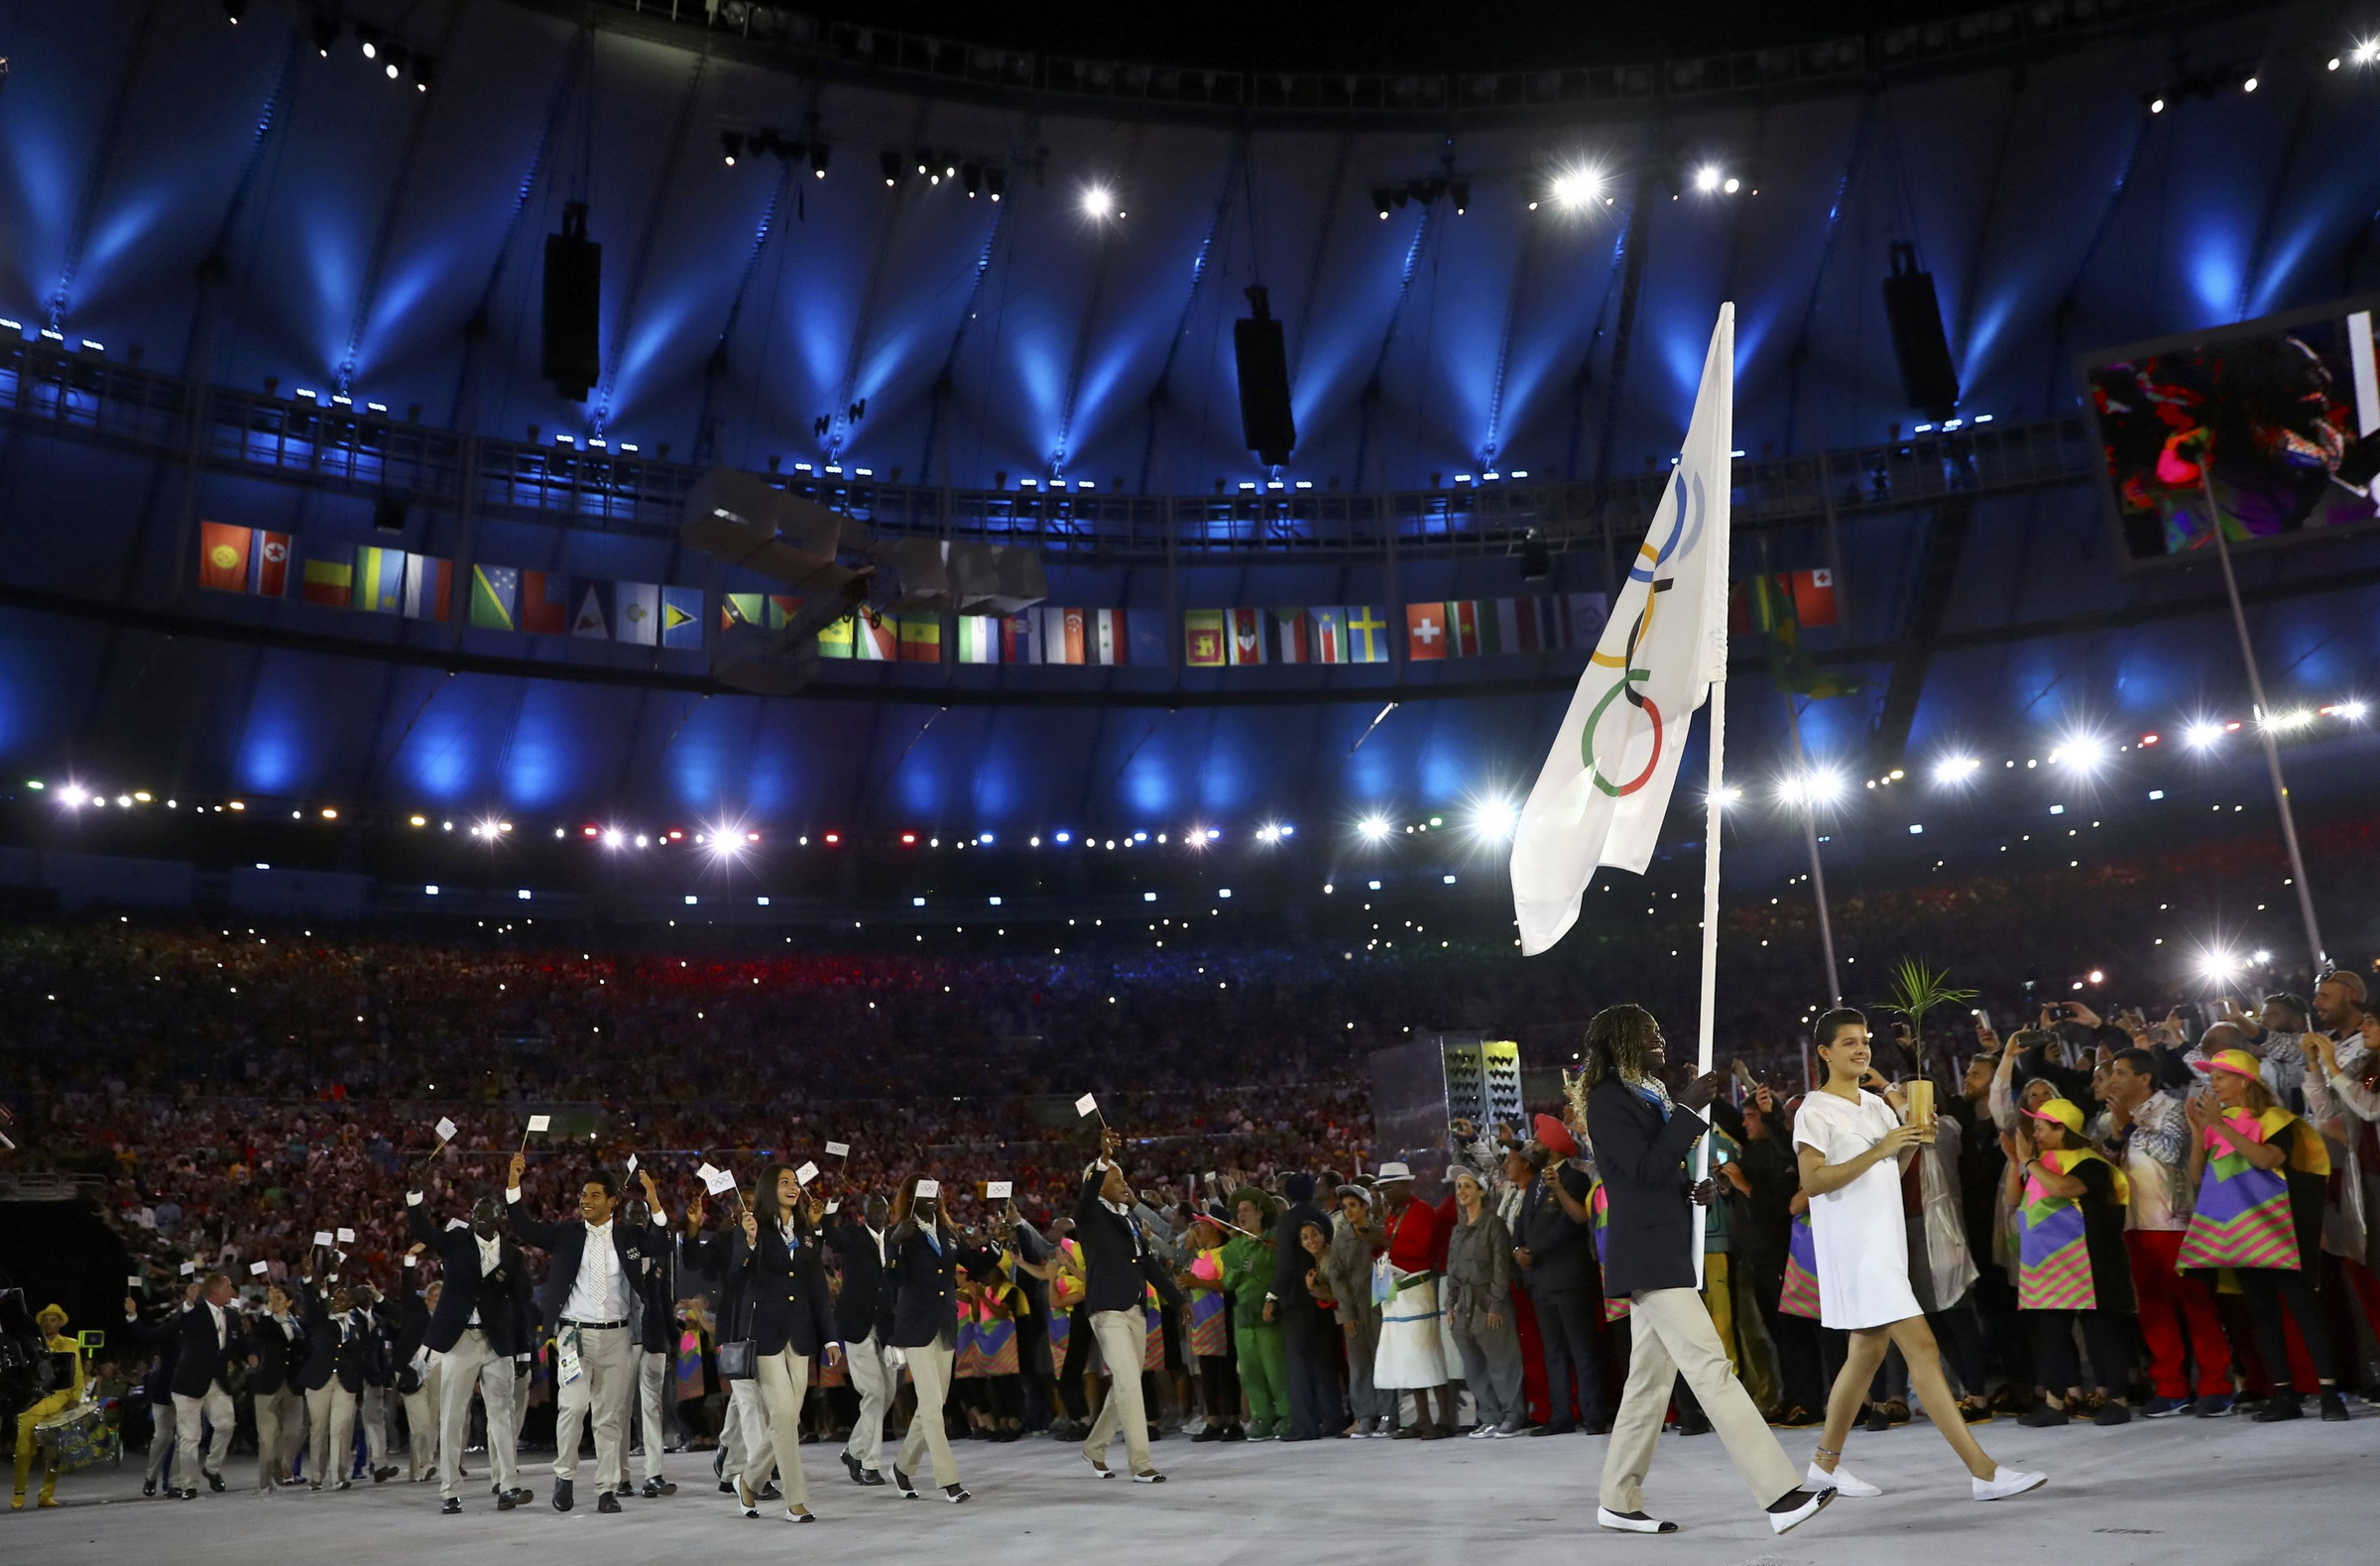 The new Refugee Olympic Team arrives for the opening ceremony in Rio de Janeiro Aug. 5. In a personal message addressed to each of the 10 members of the team, Pope Francis wished them success in their events and thanked them for the witness they are giving the world. (CNS photo/Kai Pfaffenbach, Reuters)